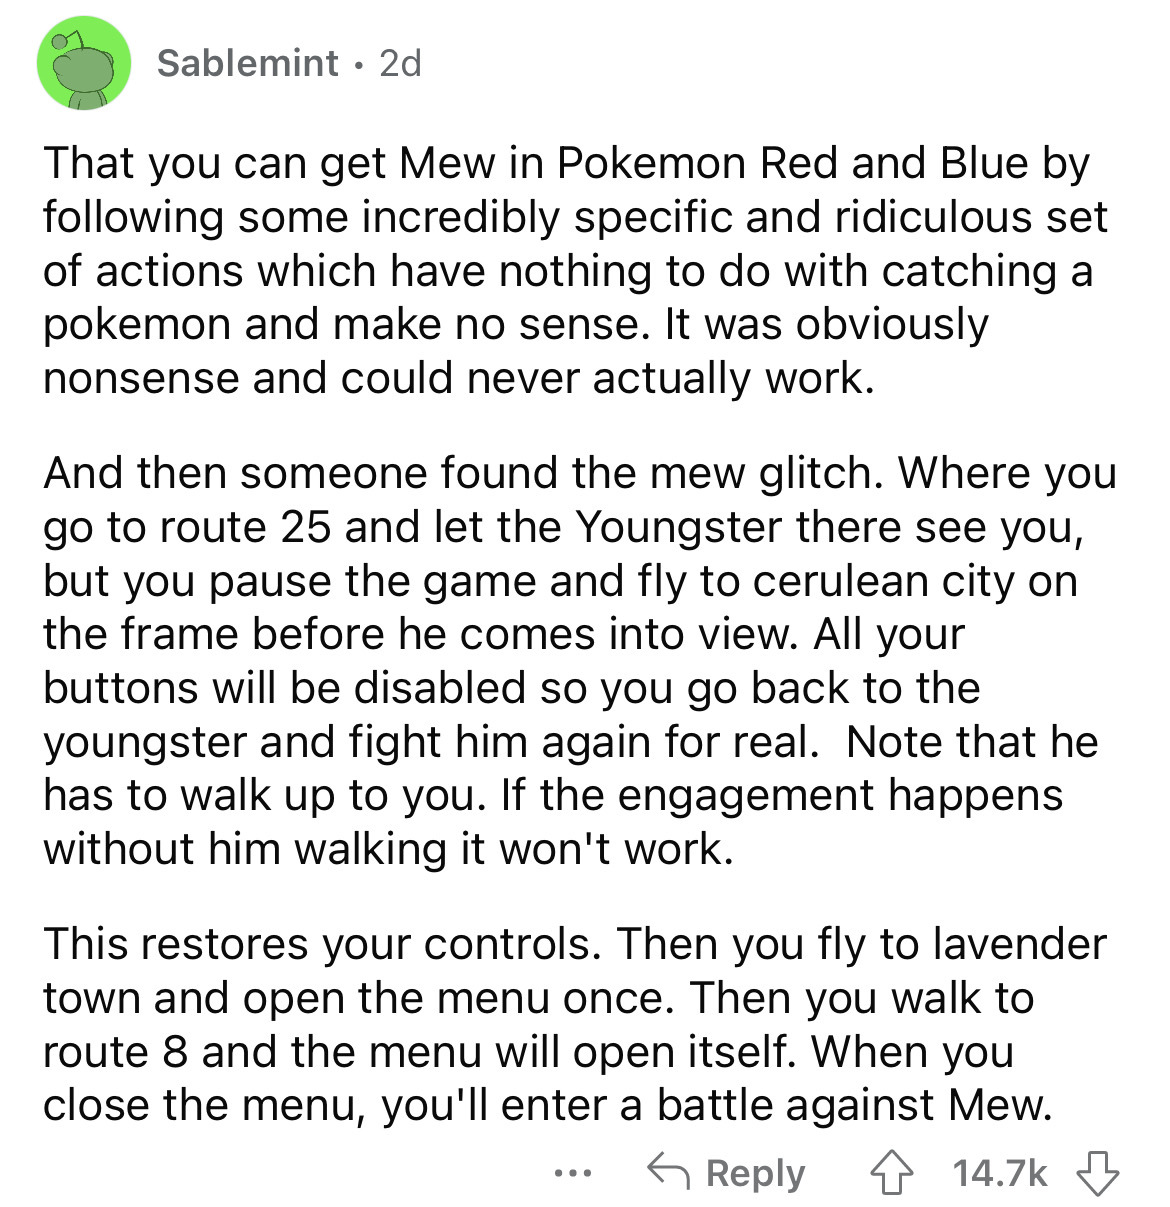 angle - Sablemint 2d That you can get Mew in Pokemon Red and Blue by ing some incredibly specific and ridiculous set of actions which have nothing to do with catching a pokemon and make no sense. It was obviously nonsense and could never actually work. An